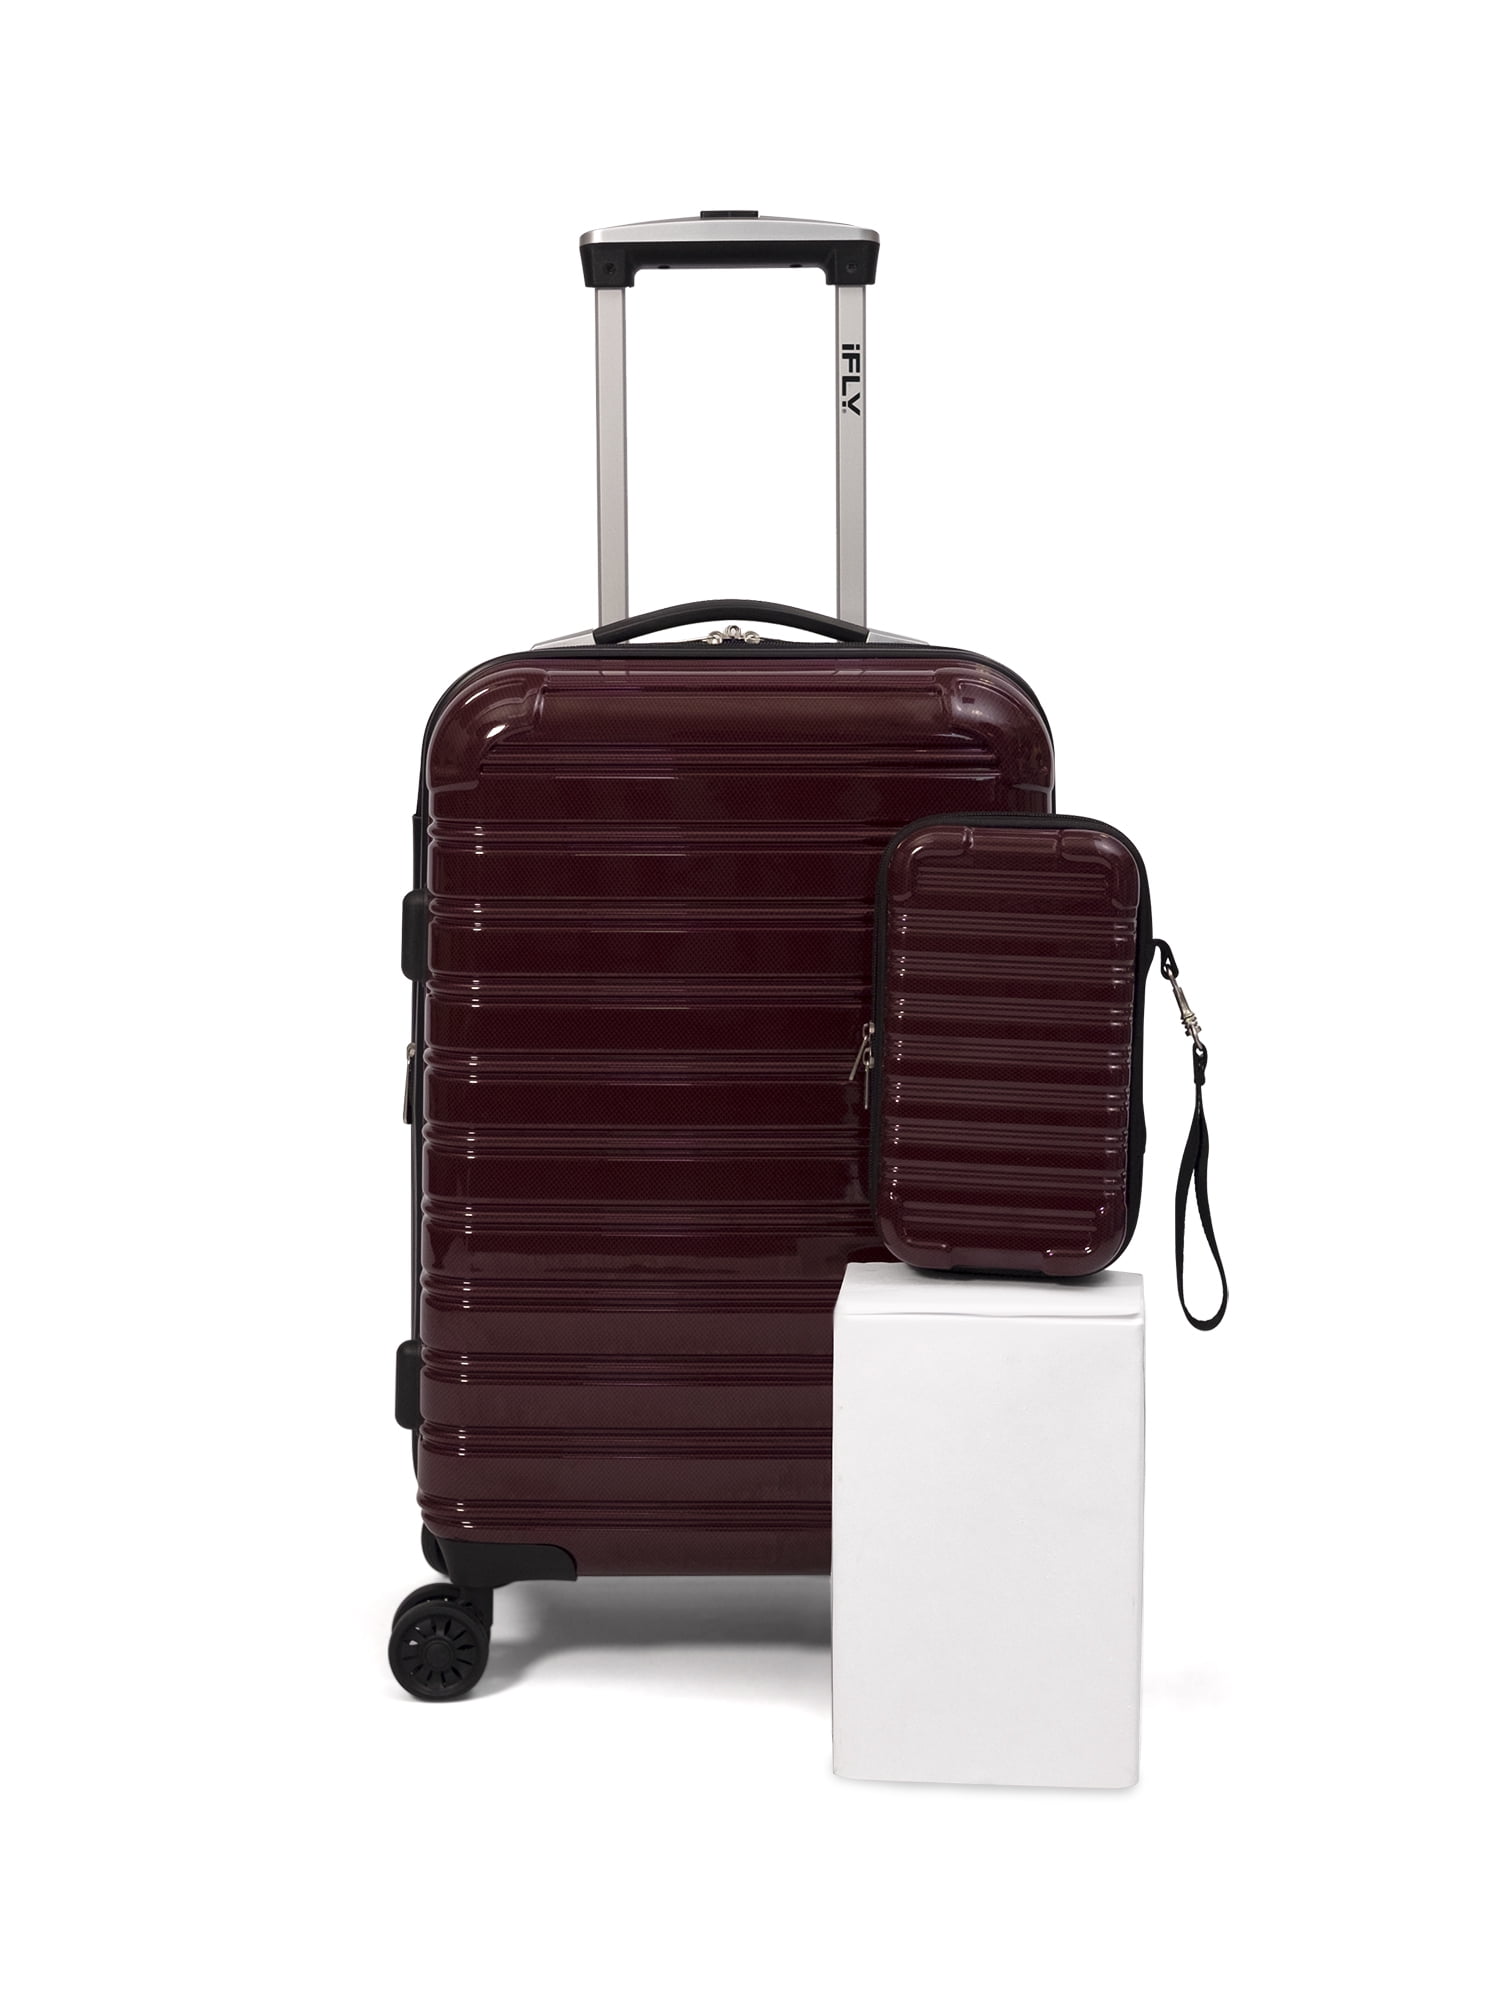 High-End Luggage | Shop Lifetime Guarantee Luxury Travel Luggage – Briggs  and Riley